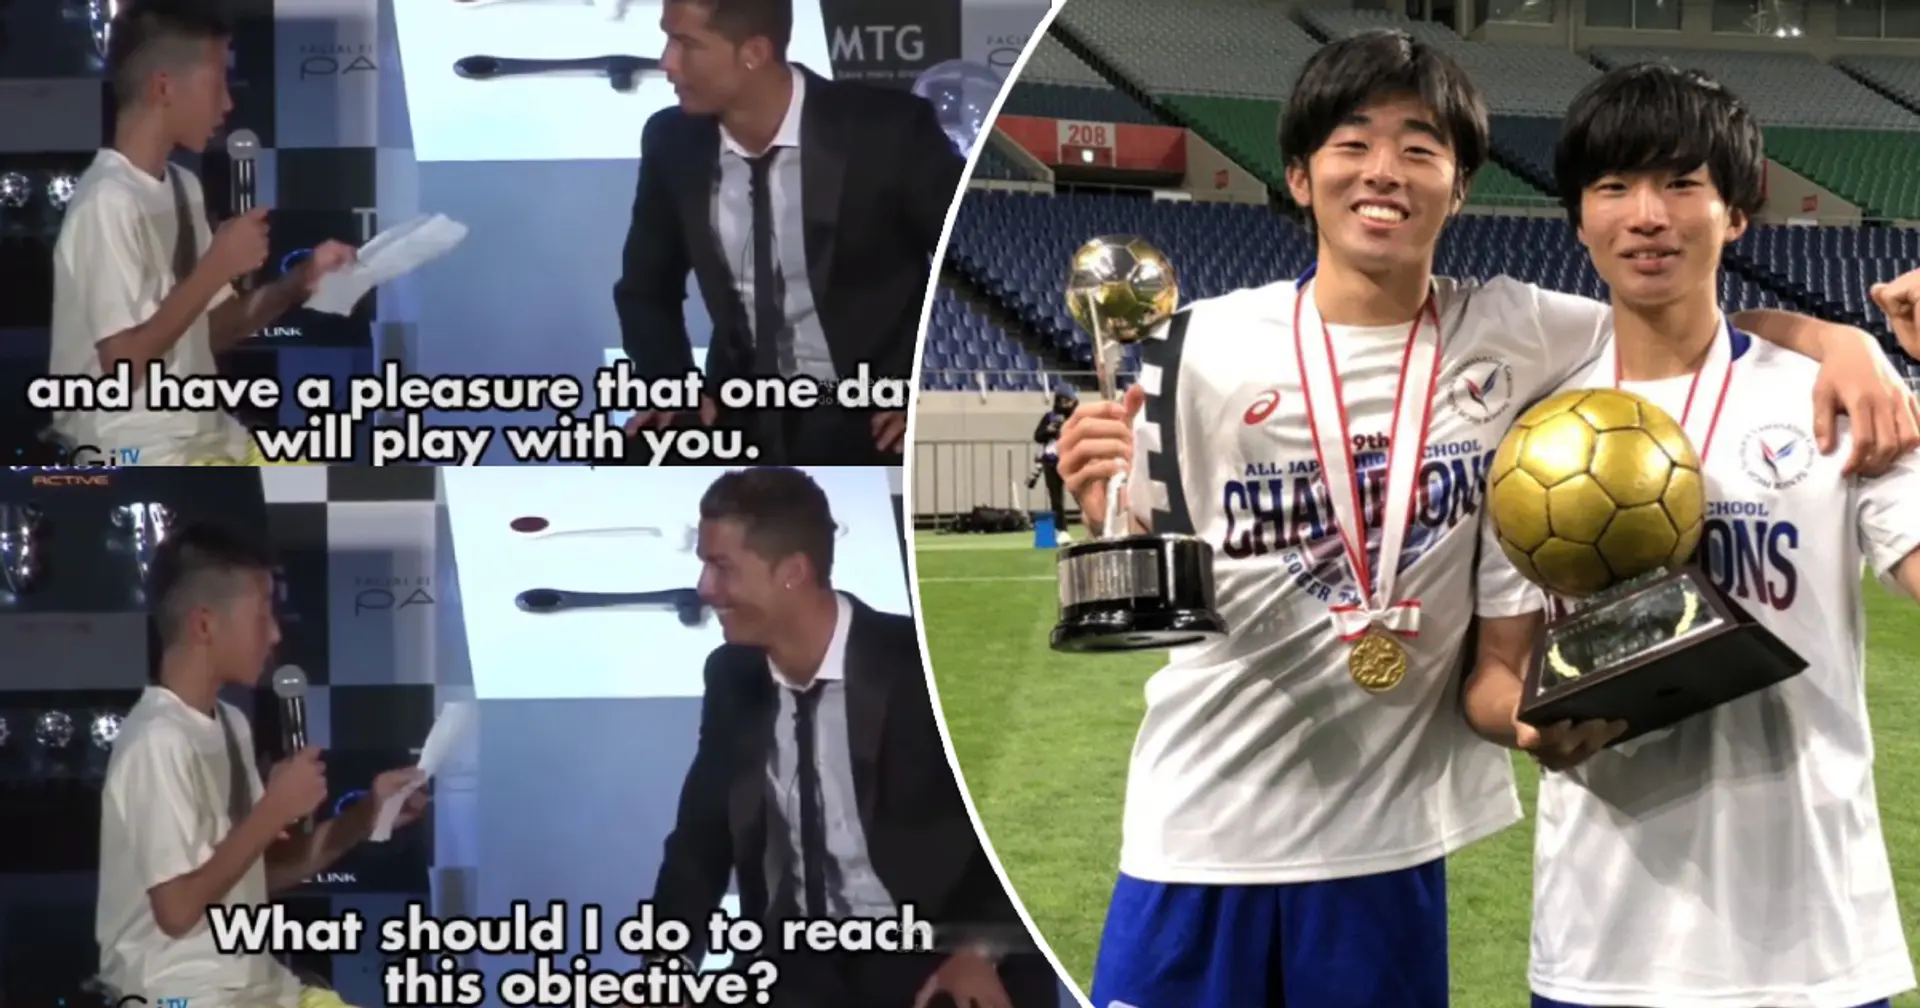 Kid who asked Cristiano advice in 2012 wins his first trophy. People laughed at him then